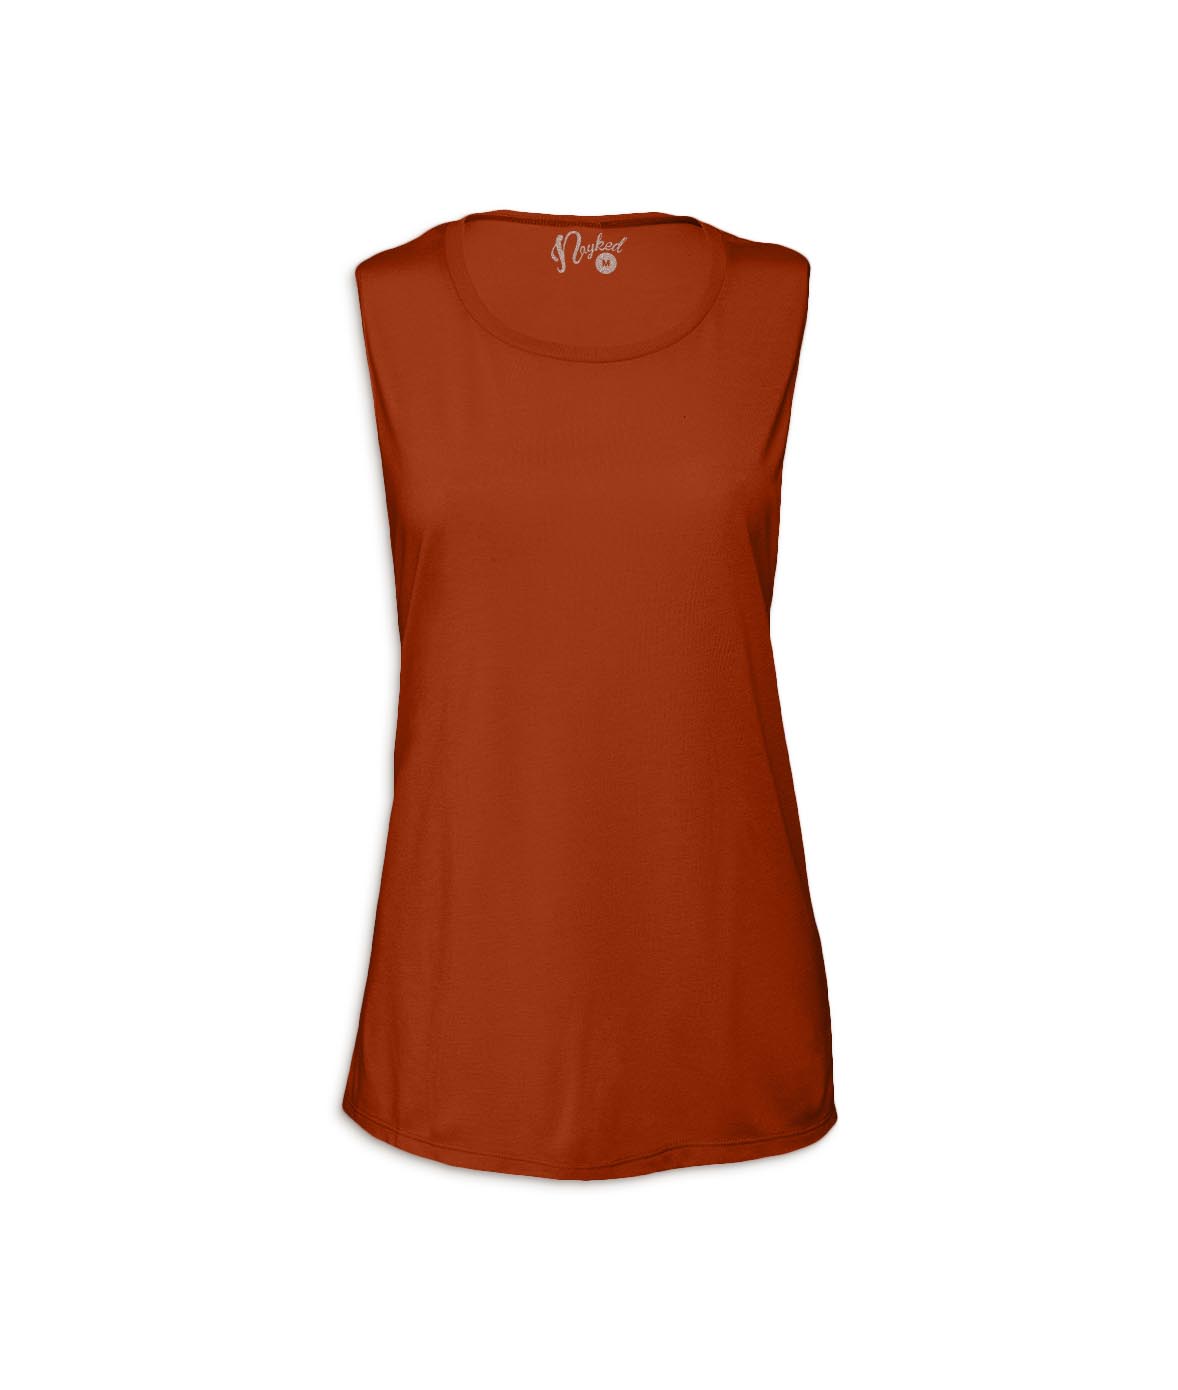 Nayked Apparel Women Women's Ridiculously Soft Scoop Muscle Tank